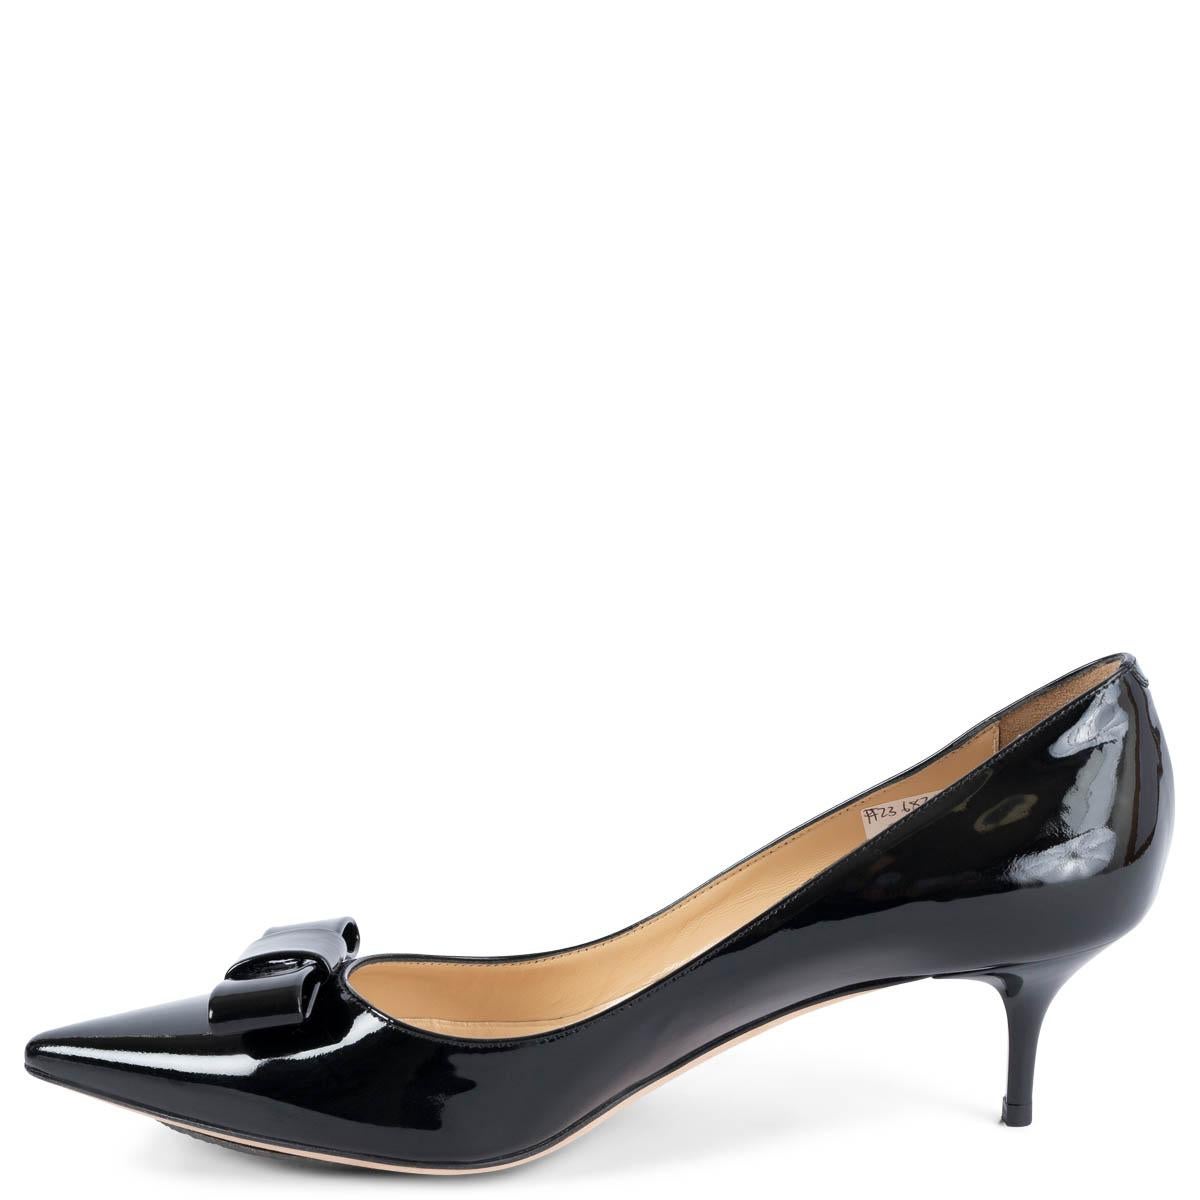 Women's JIMMY CHOO black patent leather MANEEHA Pumps Shoes 36.5 For Sale